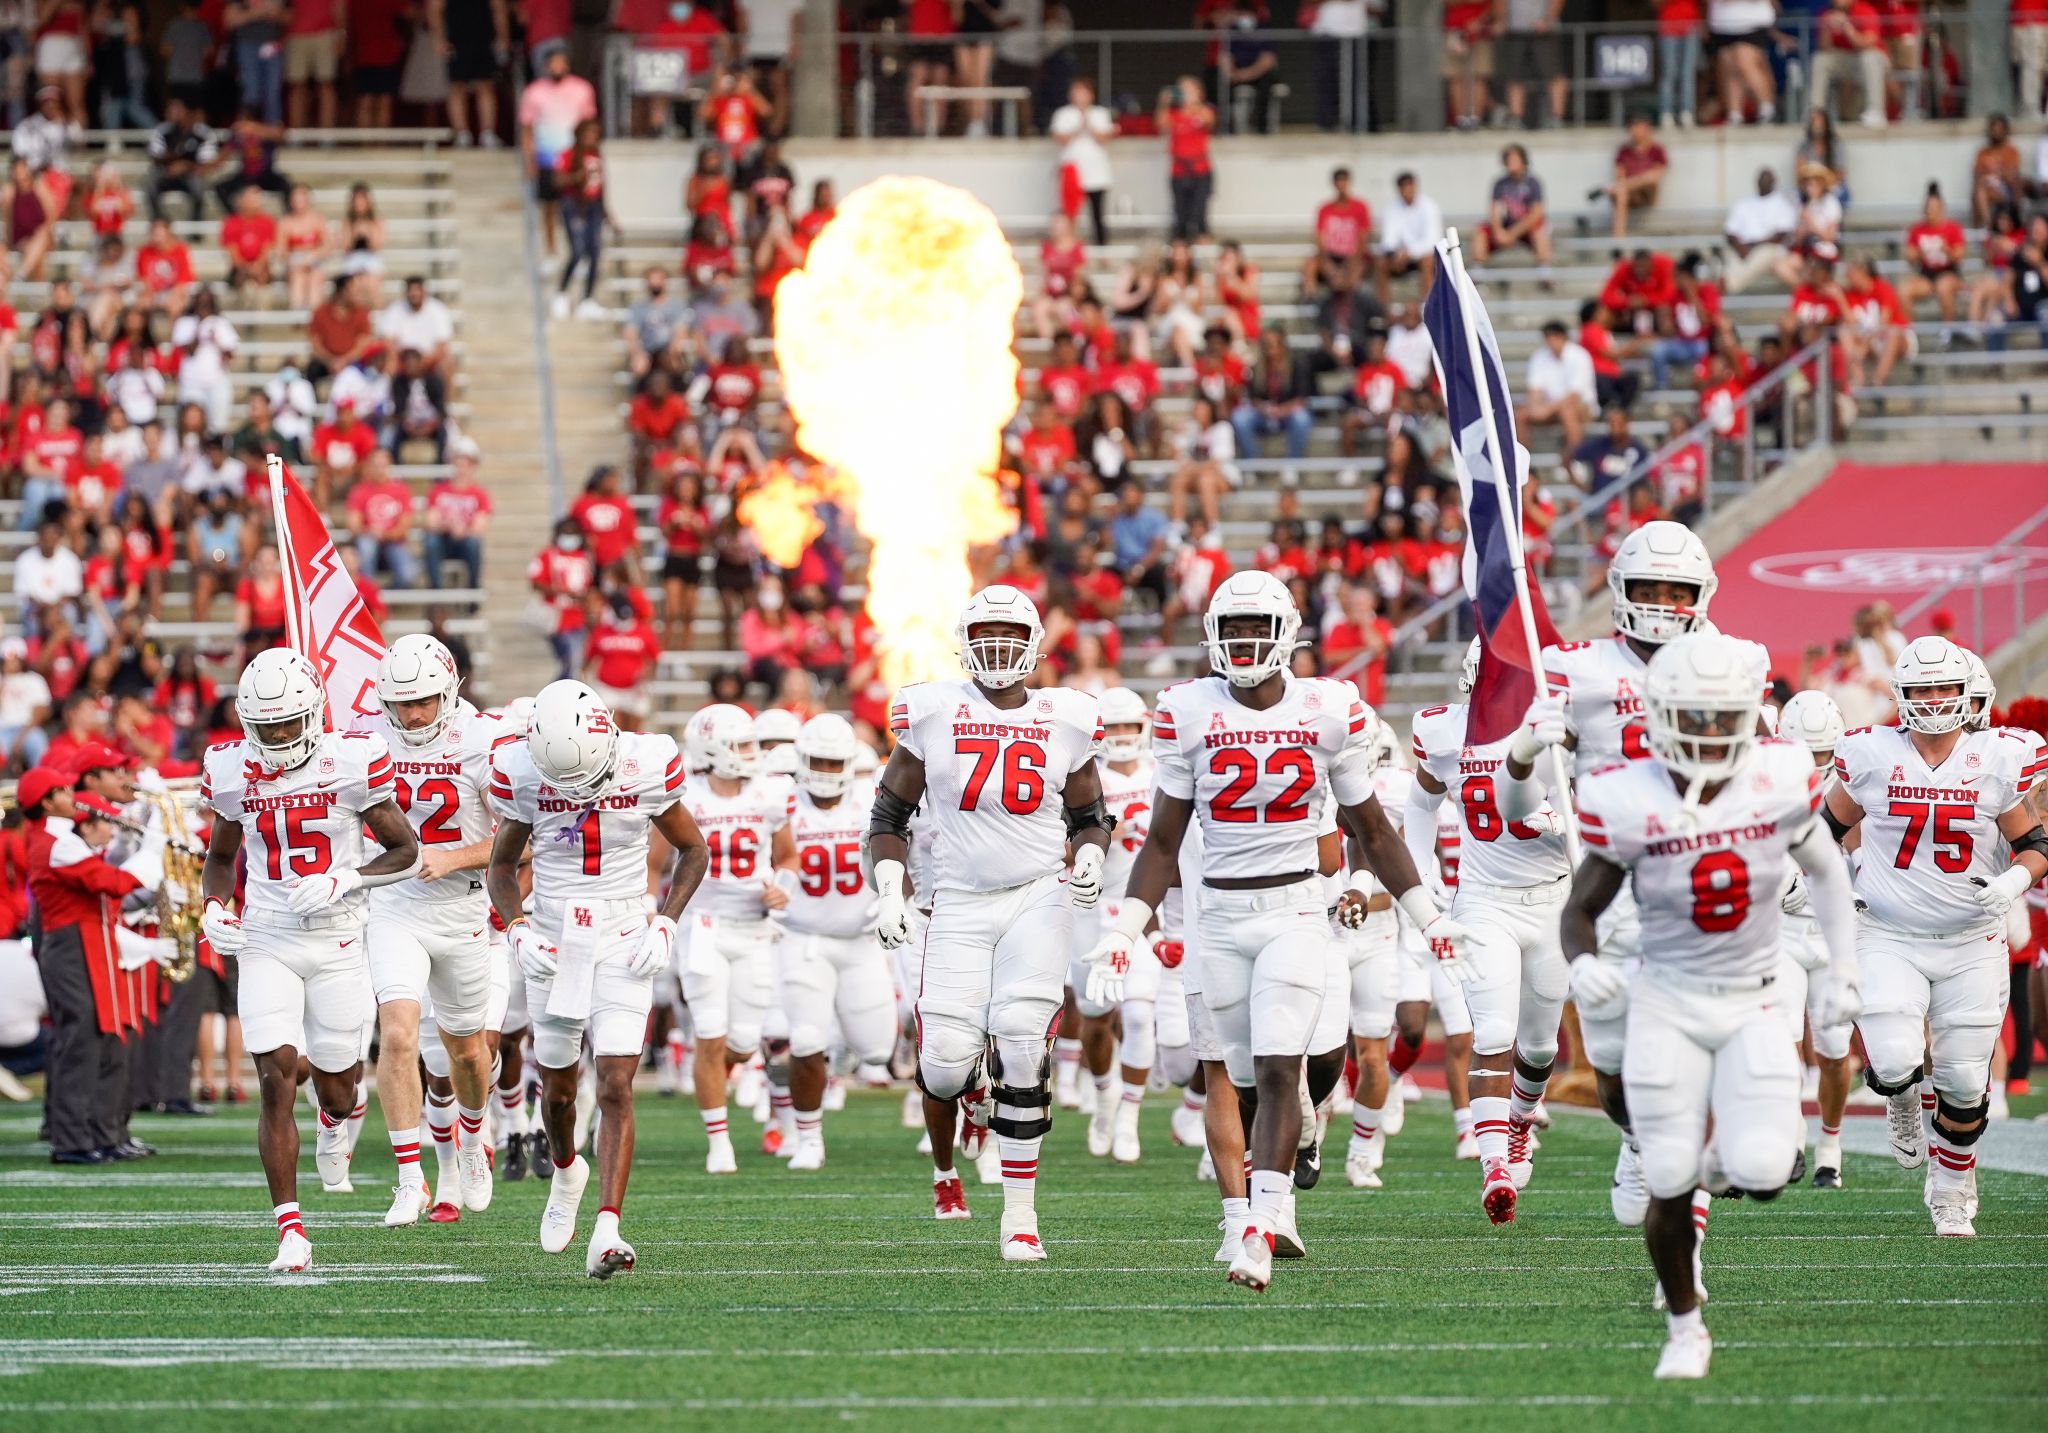 When UH moves to Big 12, will football fans come? Cougar Football